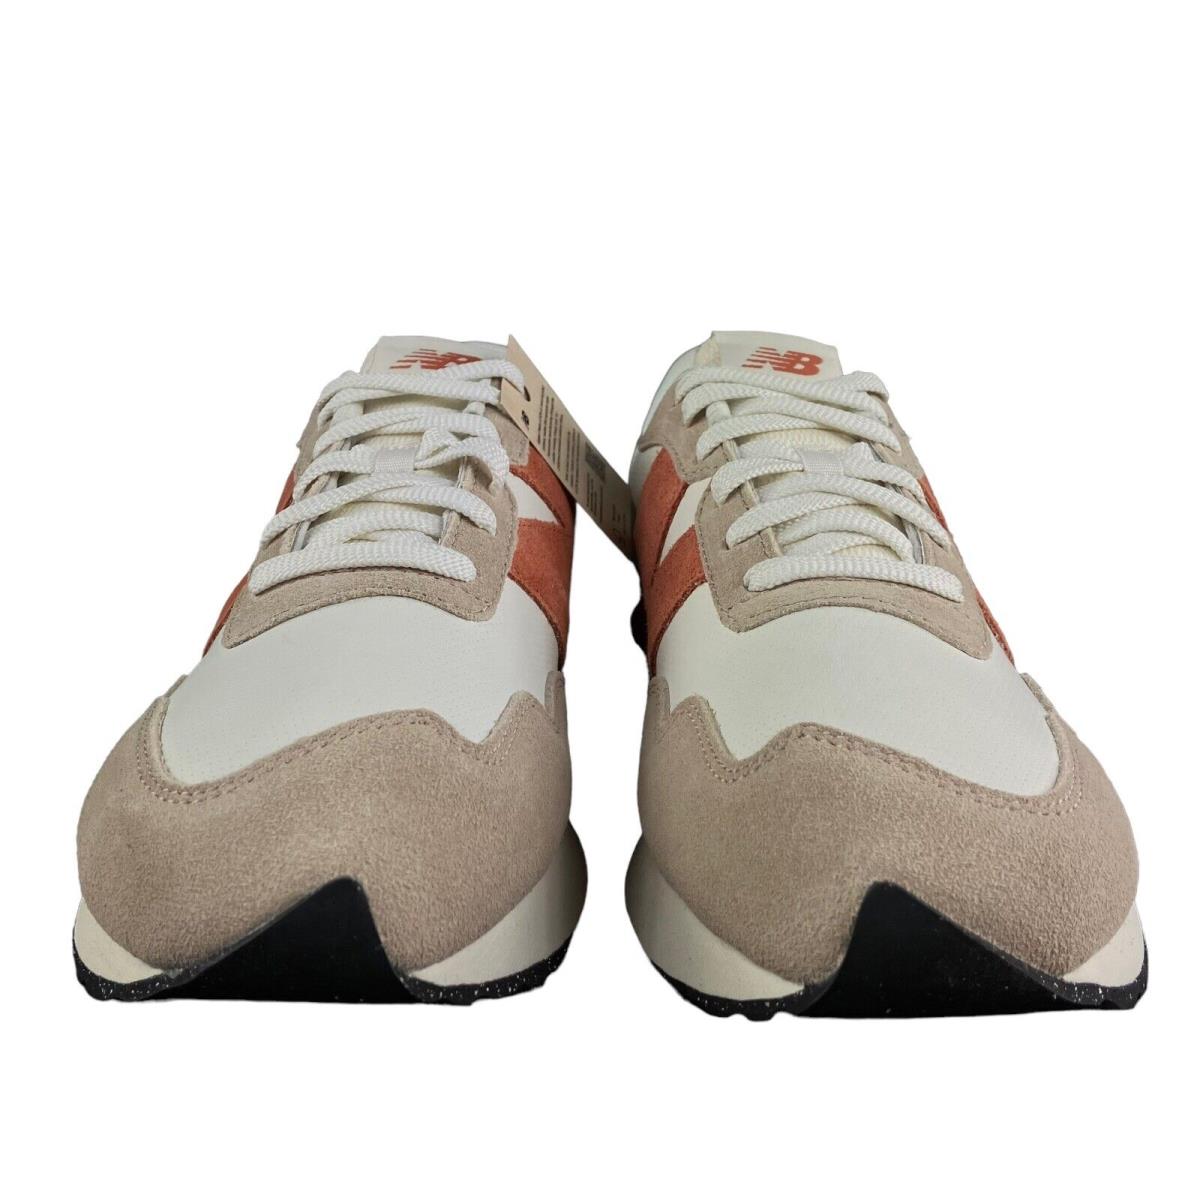 New Balance Men`s 237 V1 Mindful Grey Calm Taupe Shoes MS237RB Sizes 8.5 - 13 D - Beige